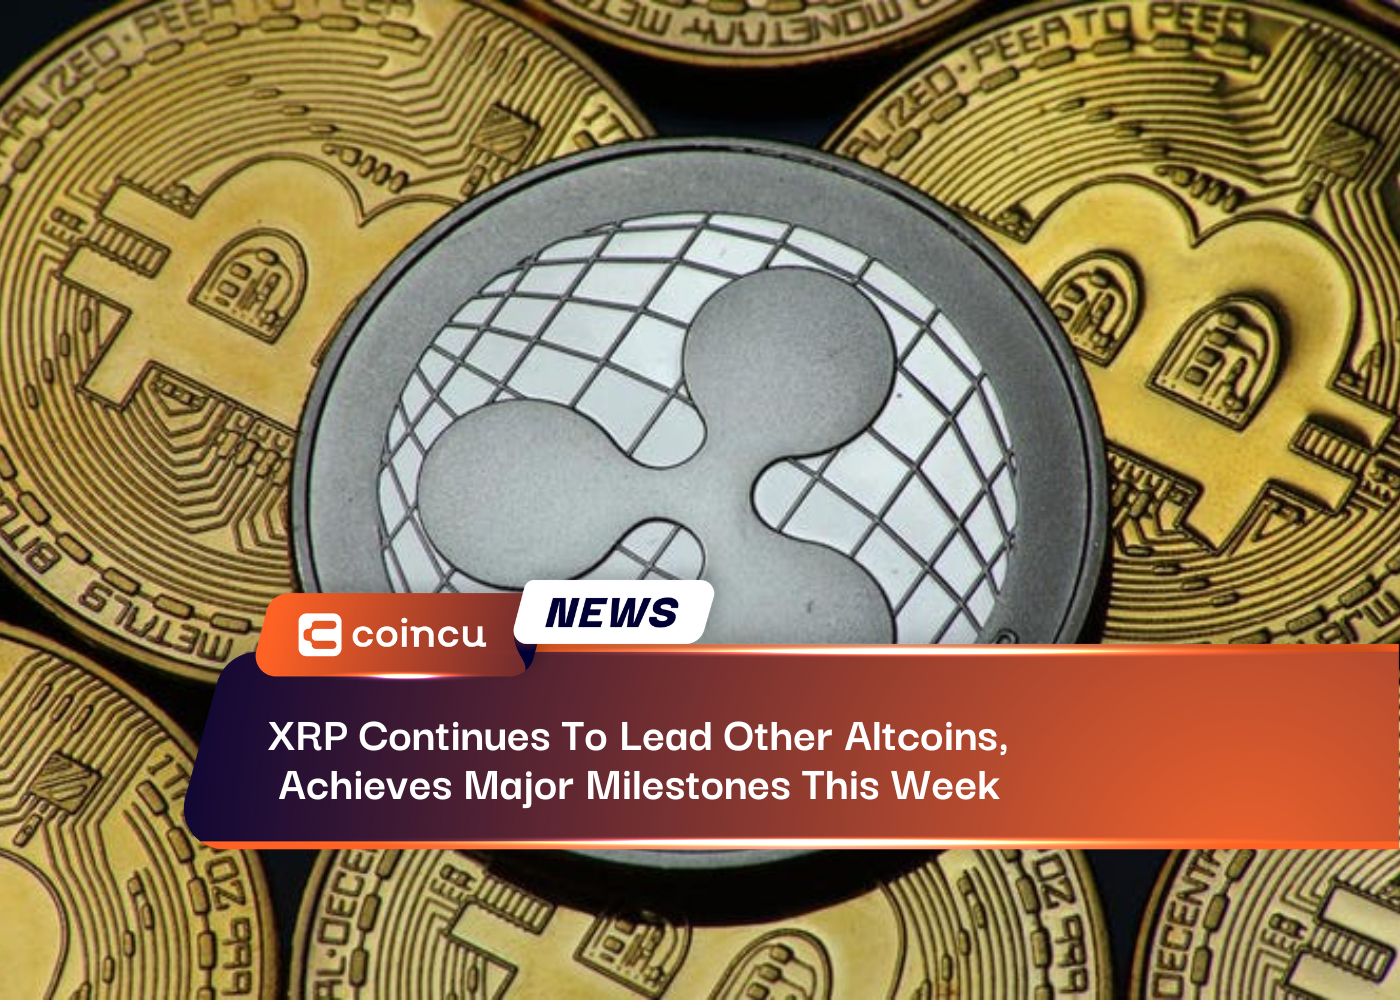 XRP Continues To Lead Other Altcoins, Achieves Major Milestones This Week